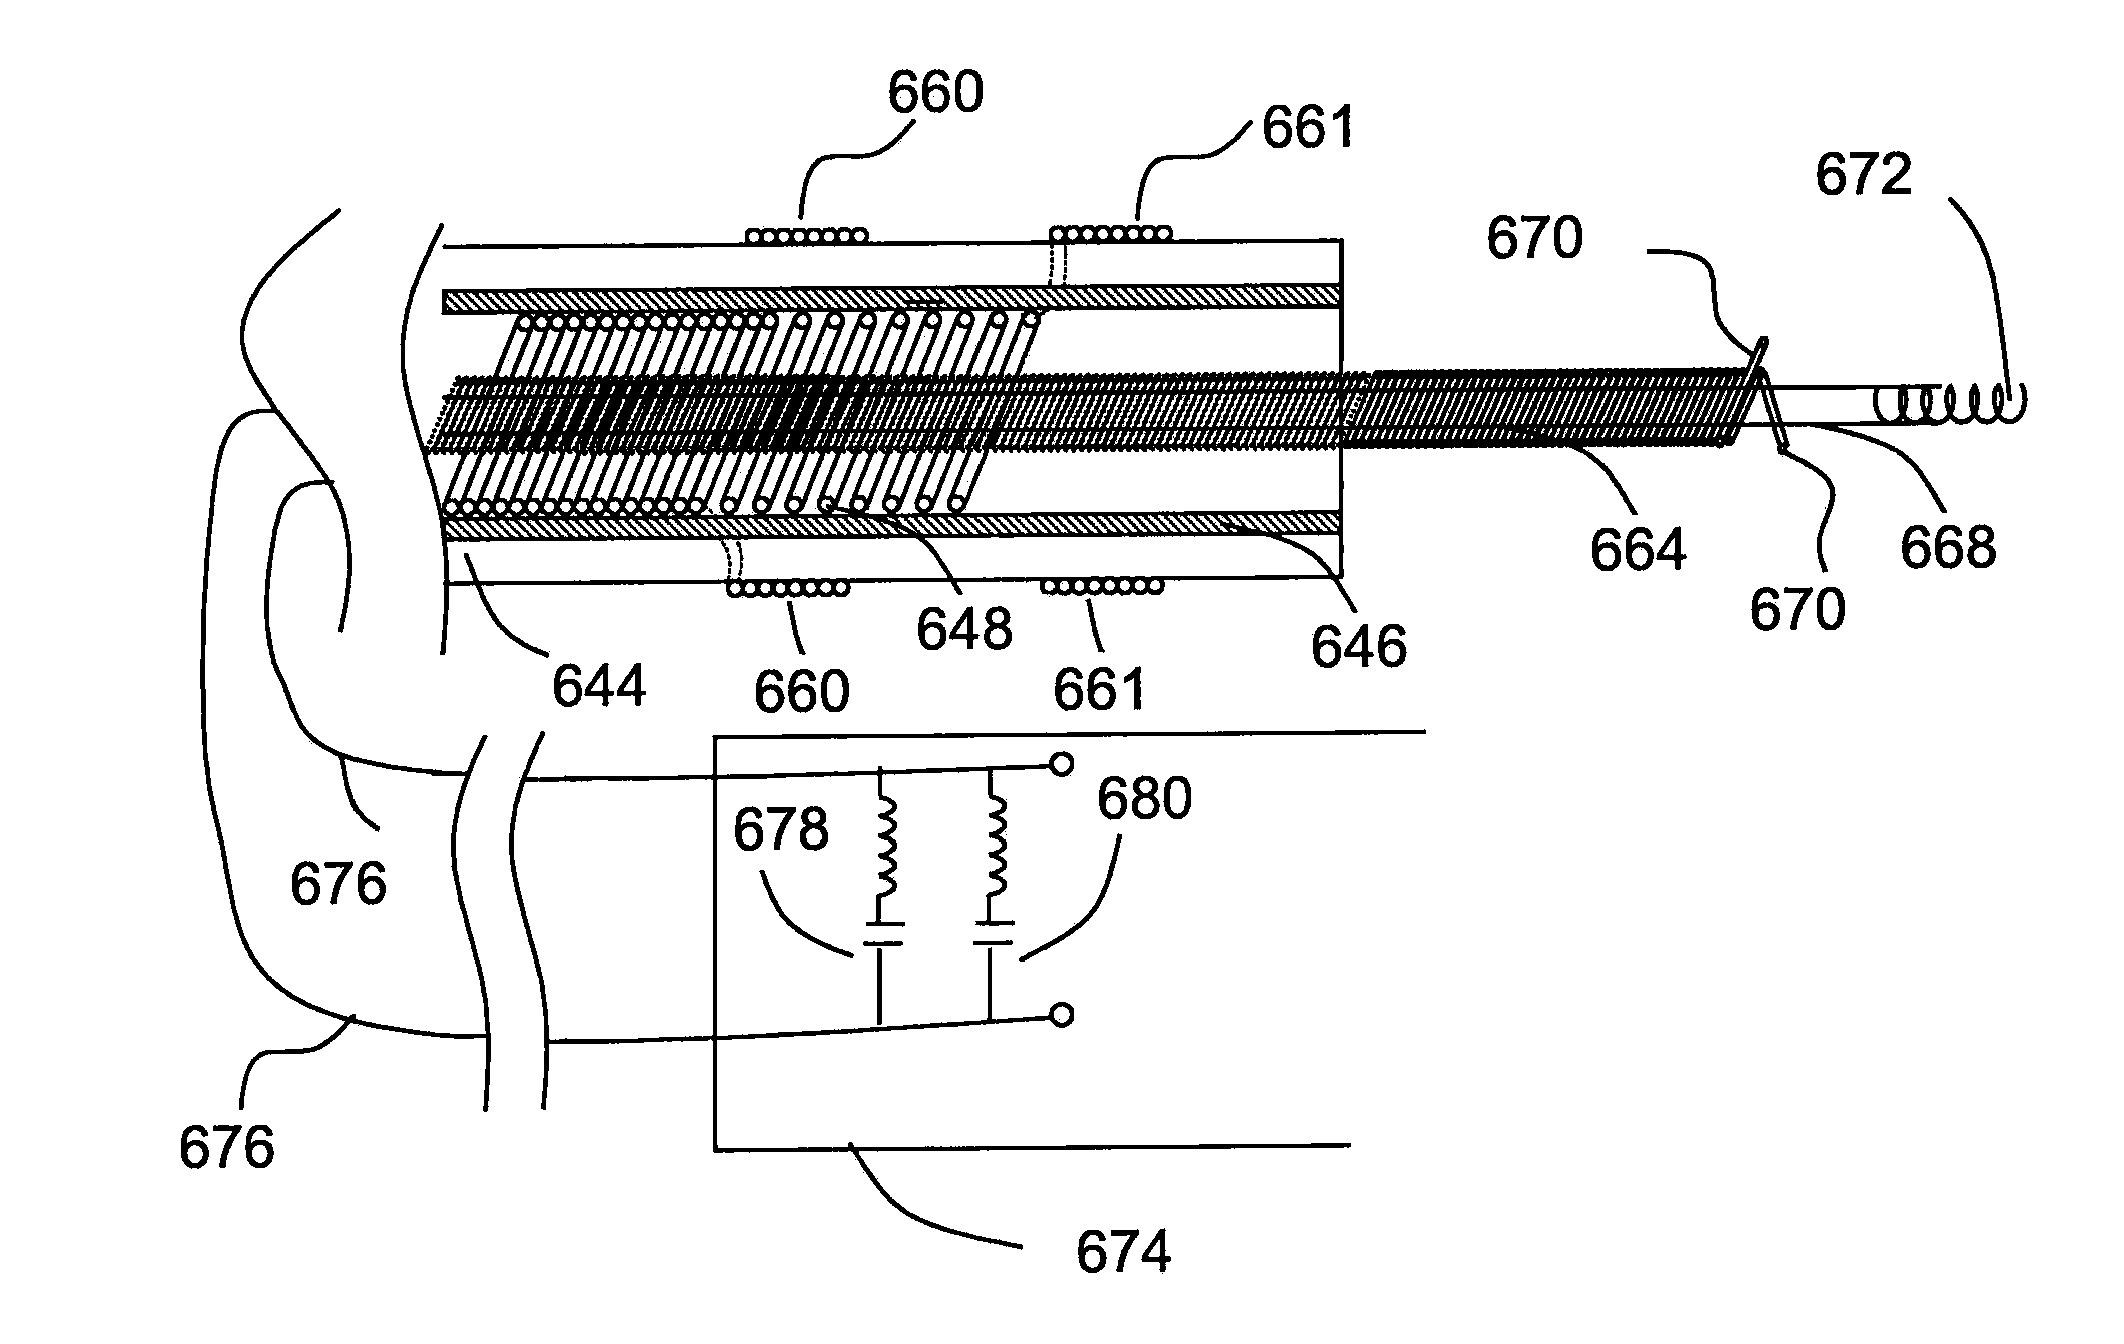 MRI compatible electrical lead for an implanted electronic medical device